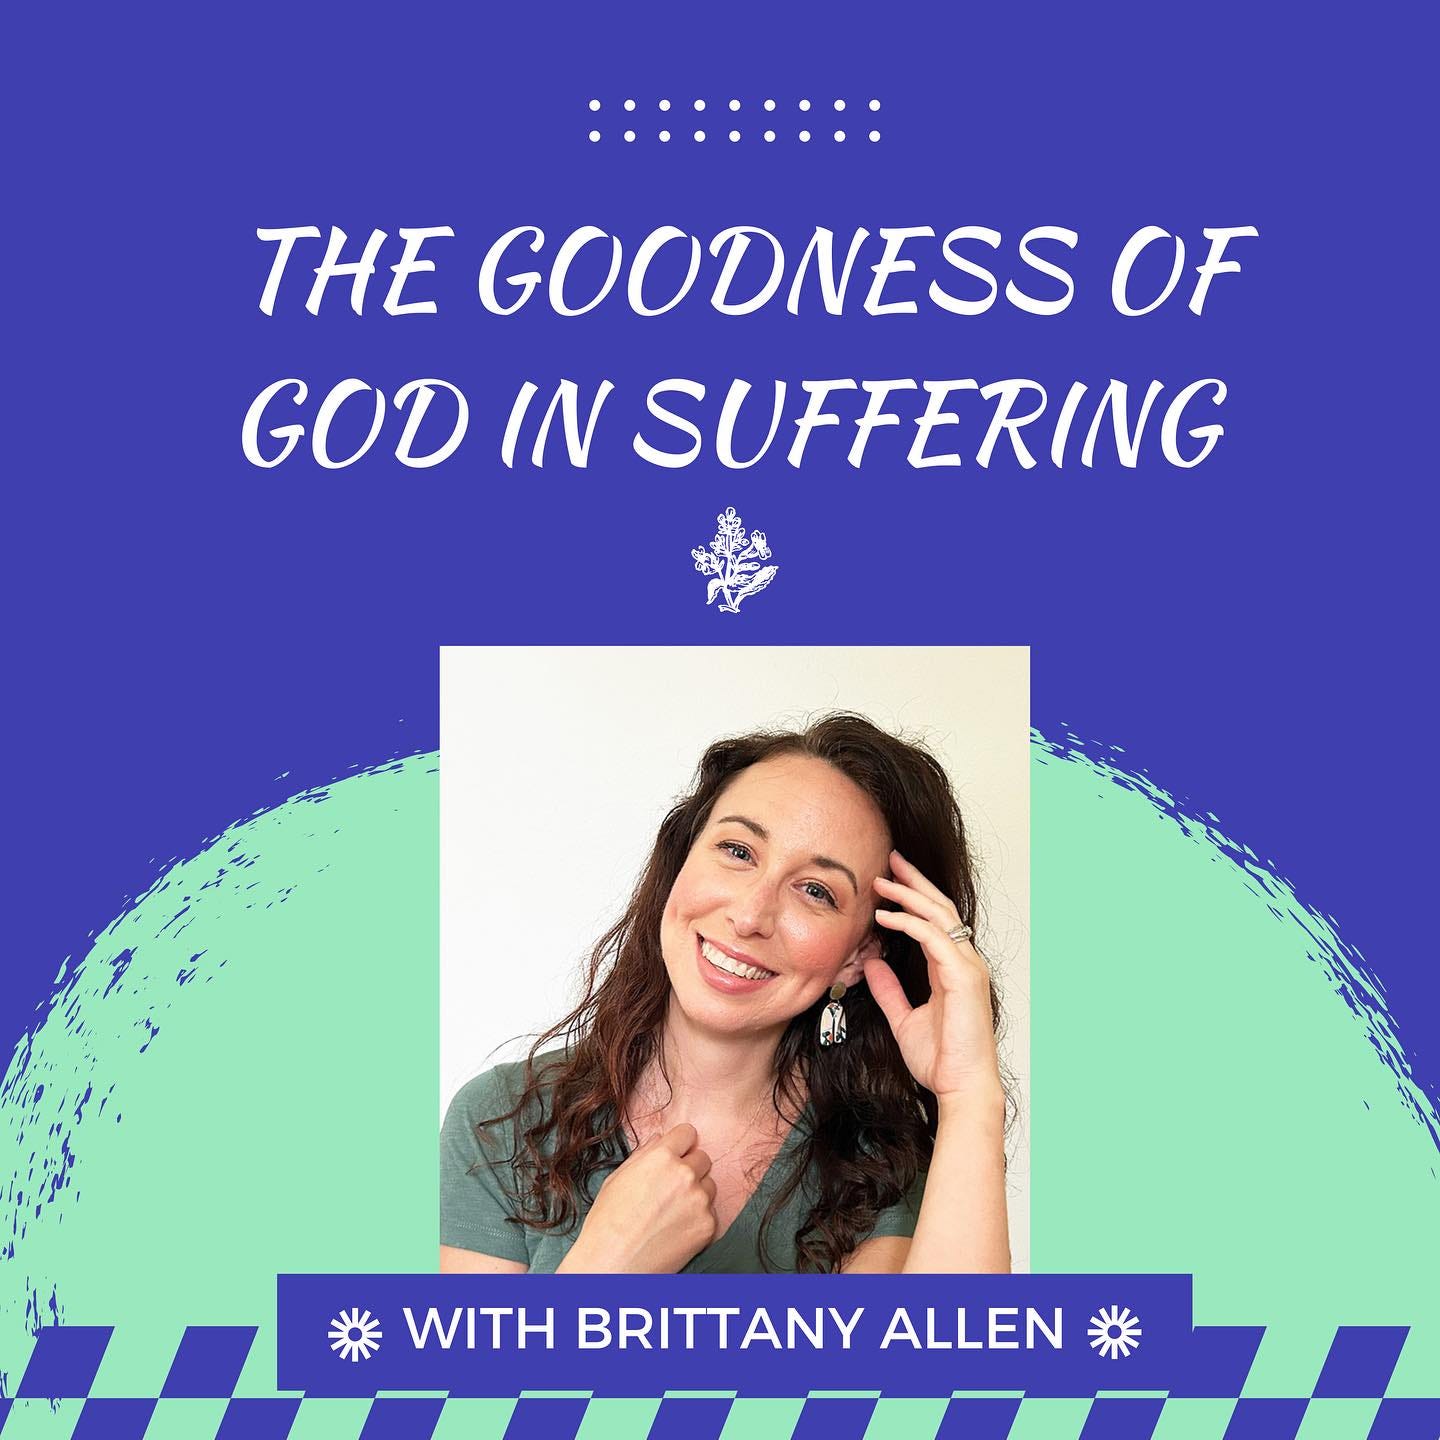 May be a graphic of 1 person and text that says 'THE GOODNESS OF GOD IN SUFFERING WITH BRITTANY ALLEN'